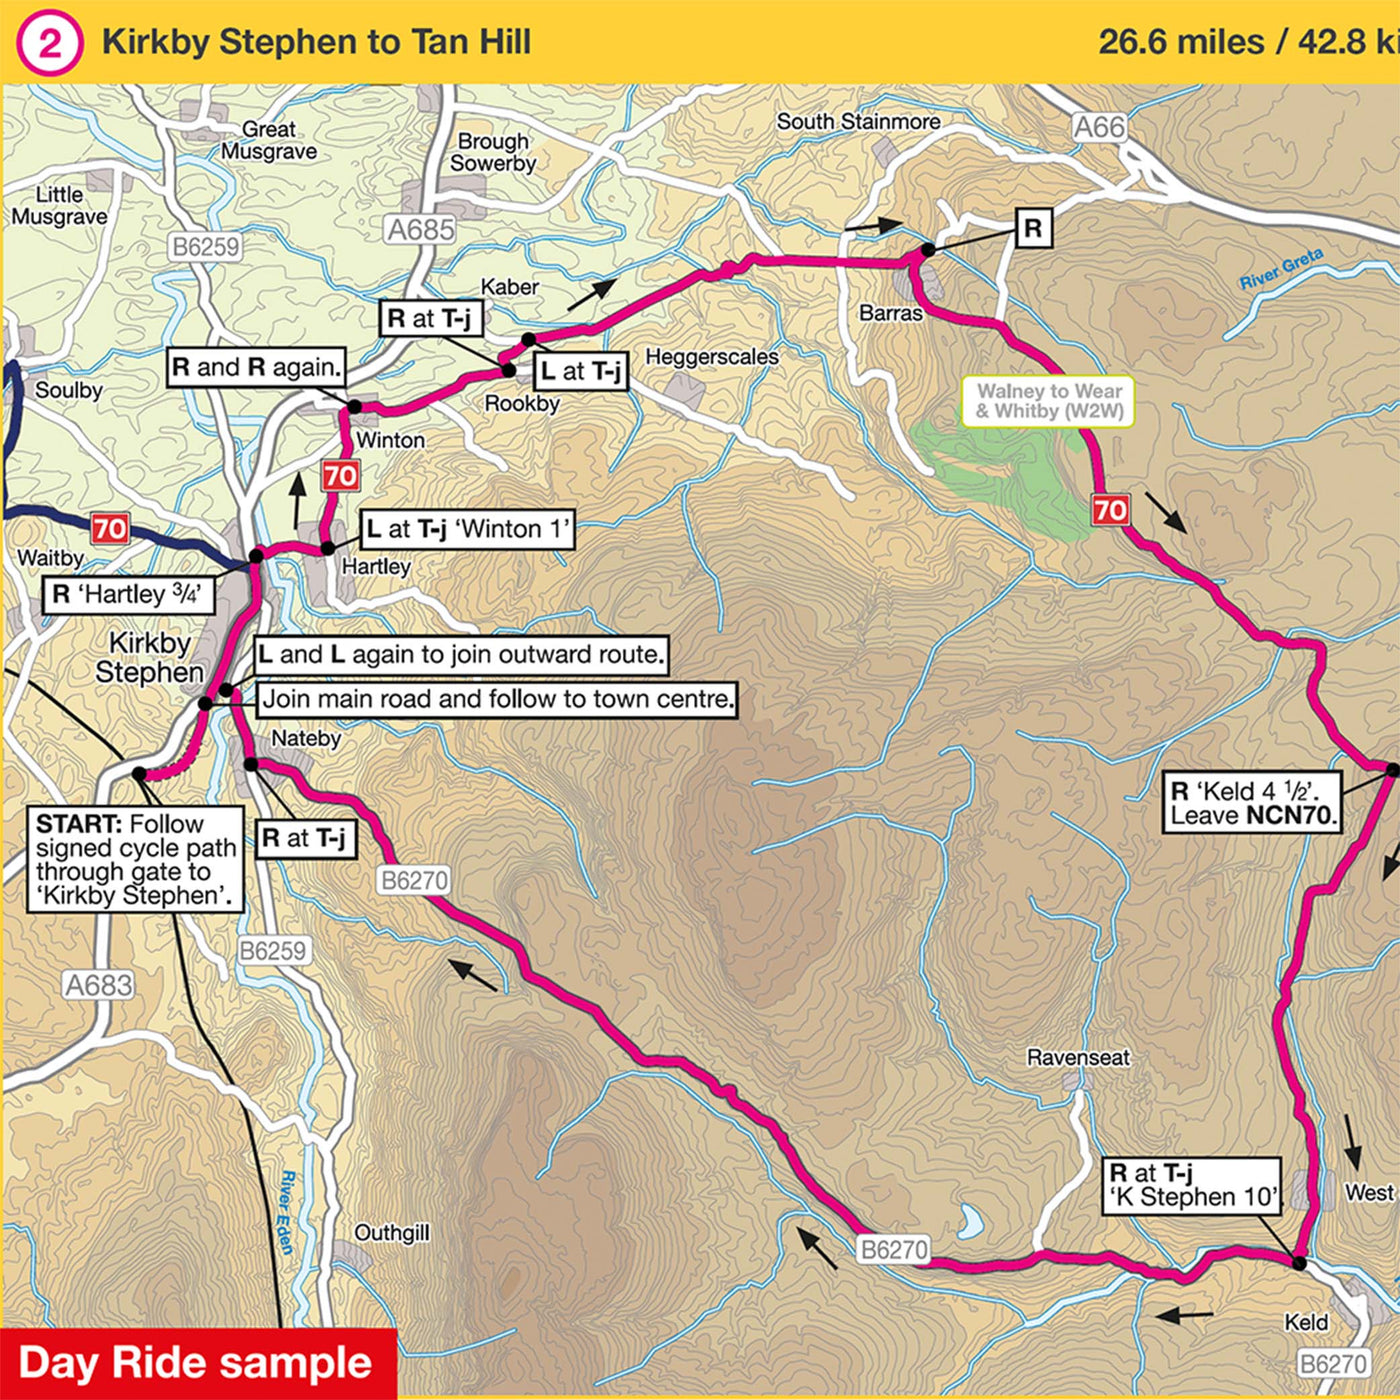 Day ride sample: Kirkby Stephen to Tan Hill, 26.6 miles